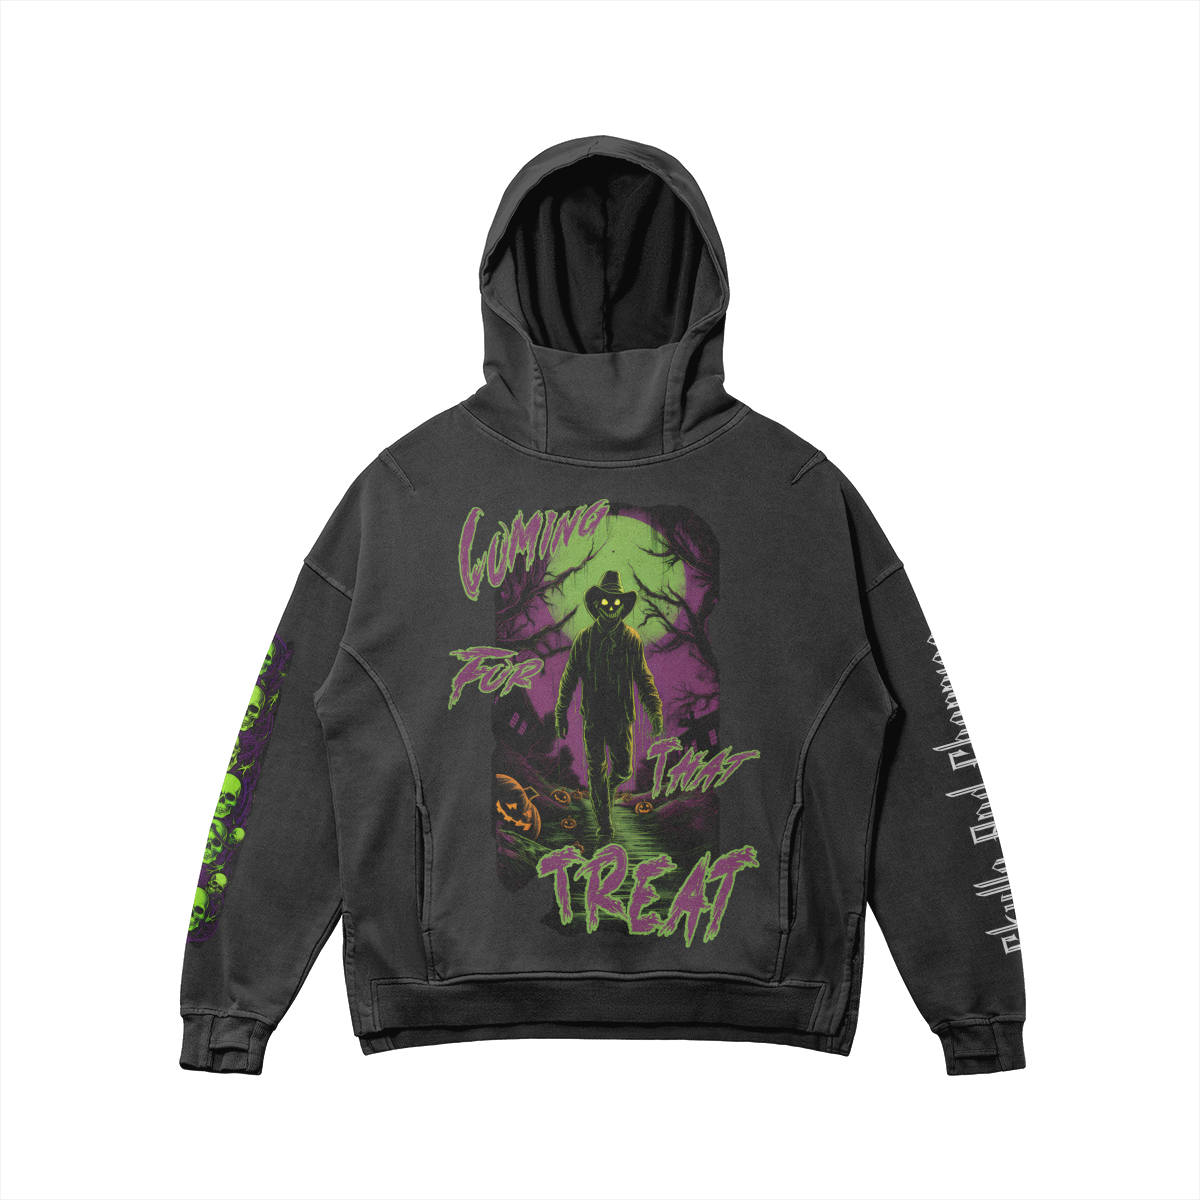 Exquisite Unisex Hoodie ''Coming For That Treat''